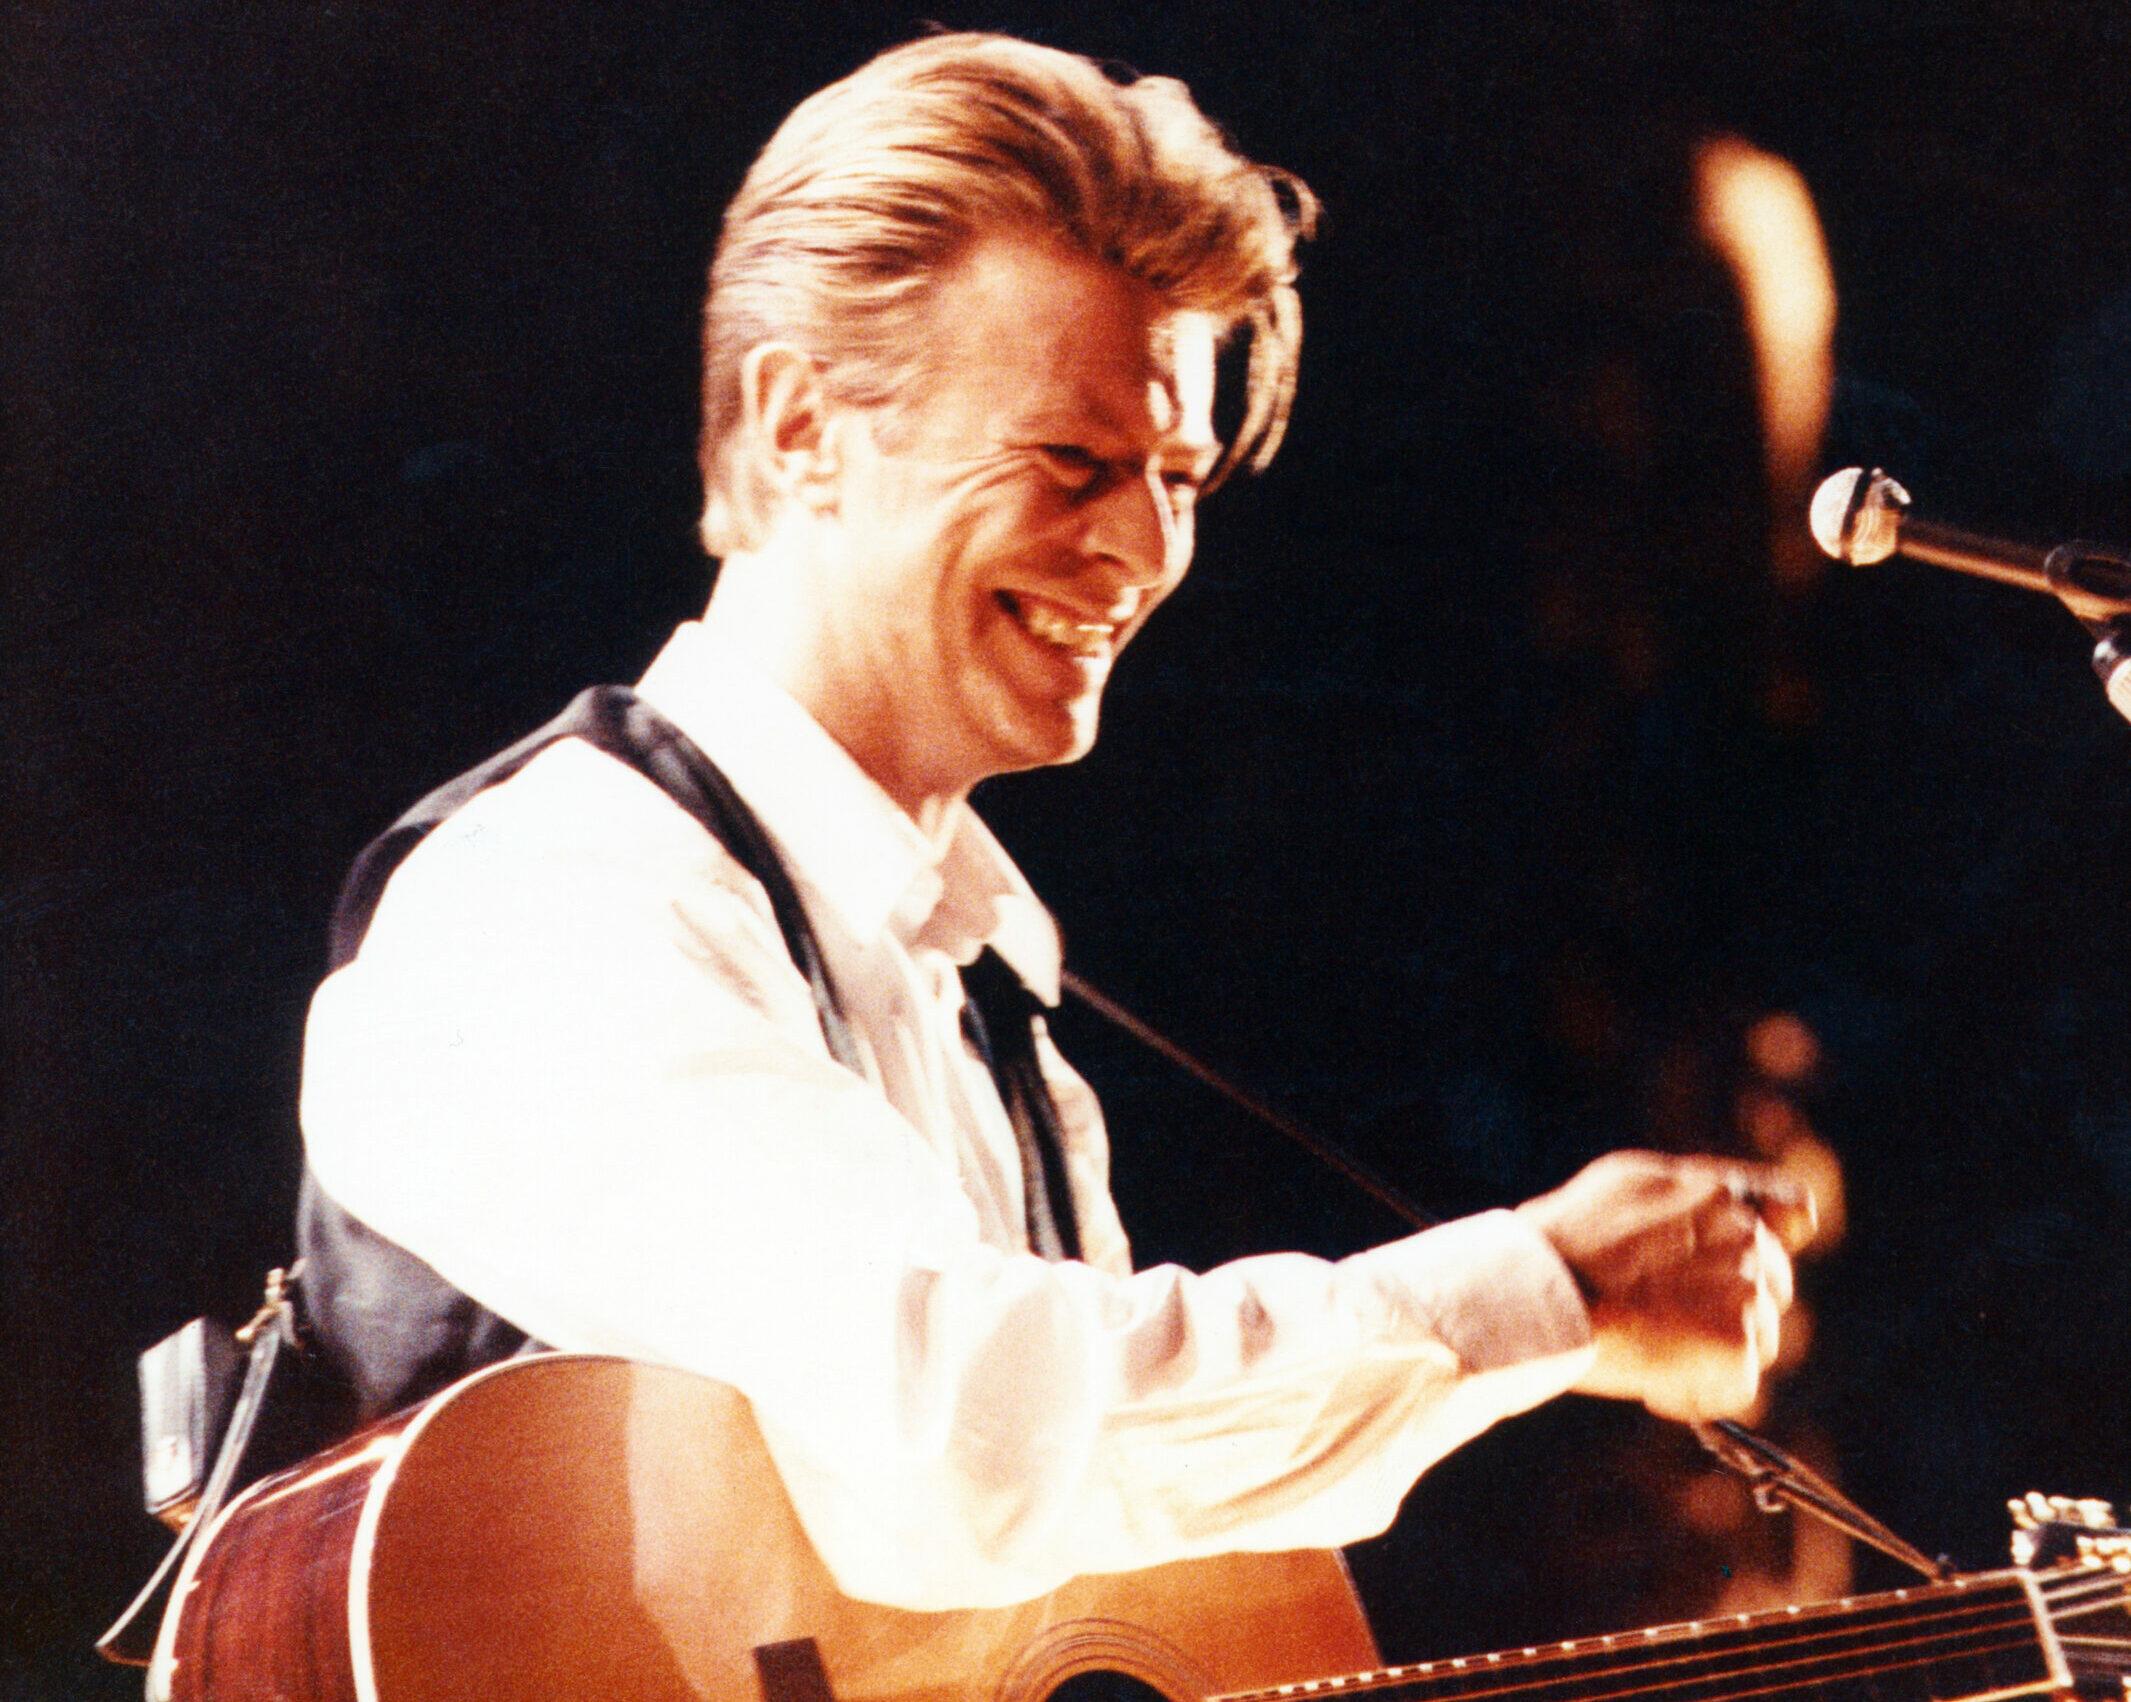 David Bowie in concert. 20th March 1990.